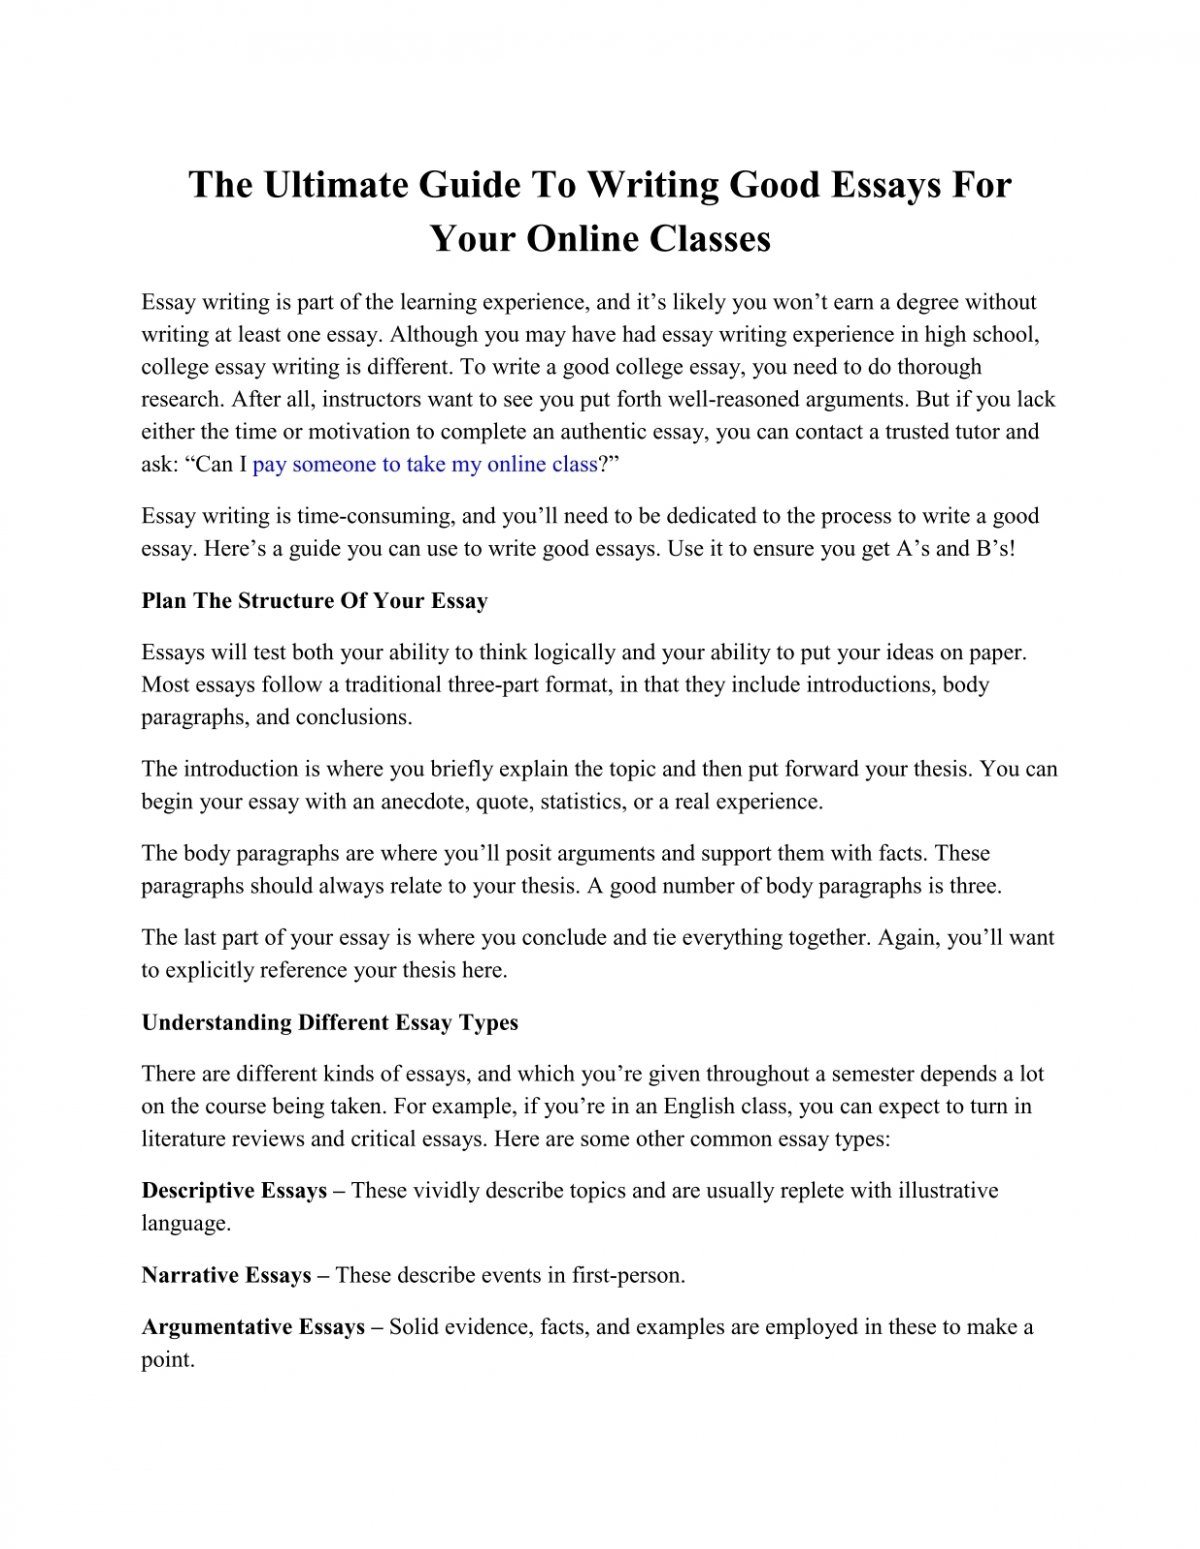 experience online classes essay